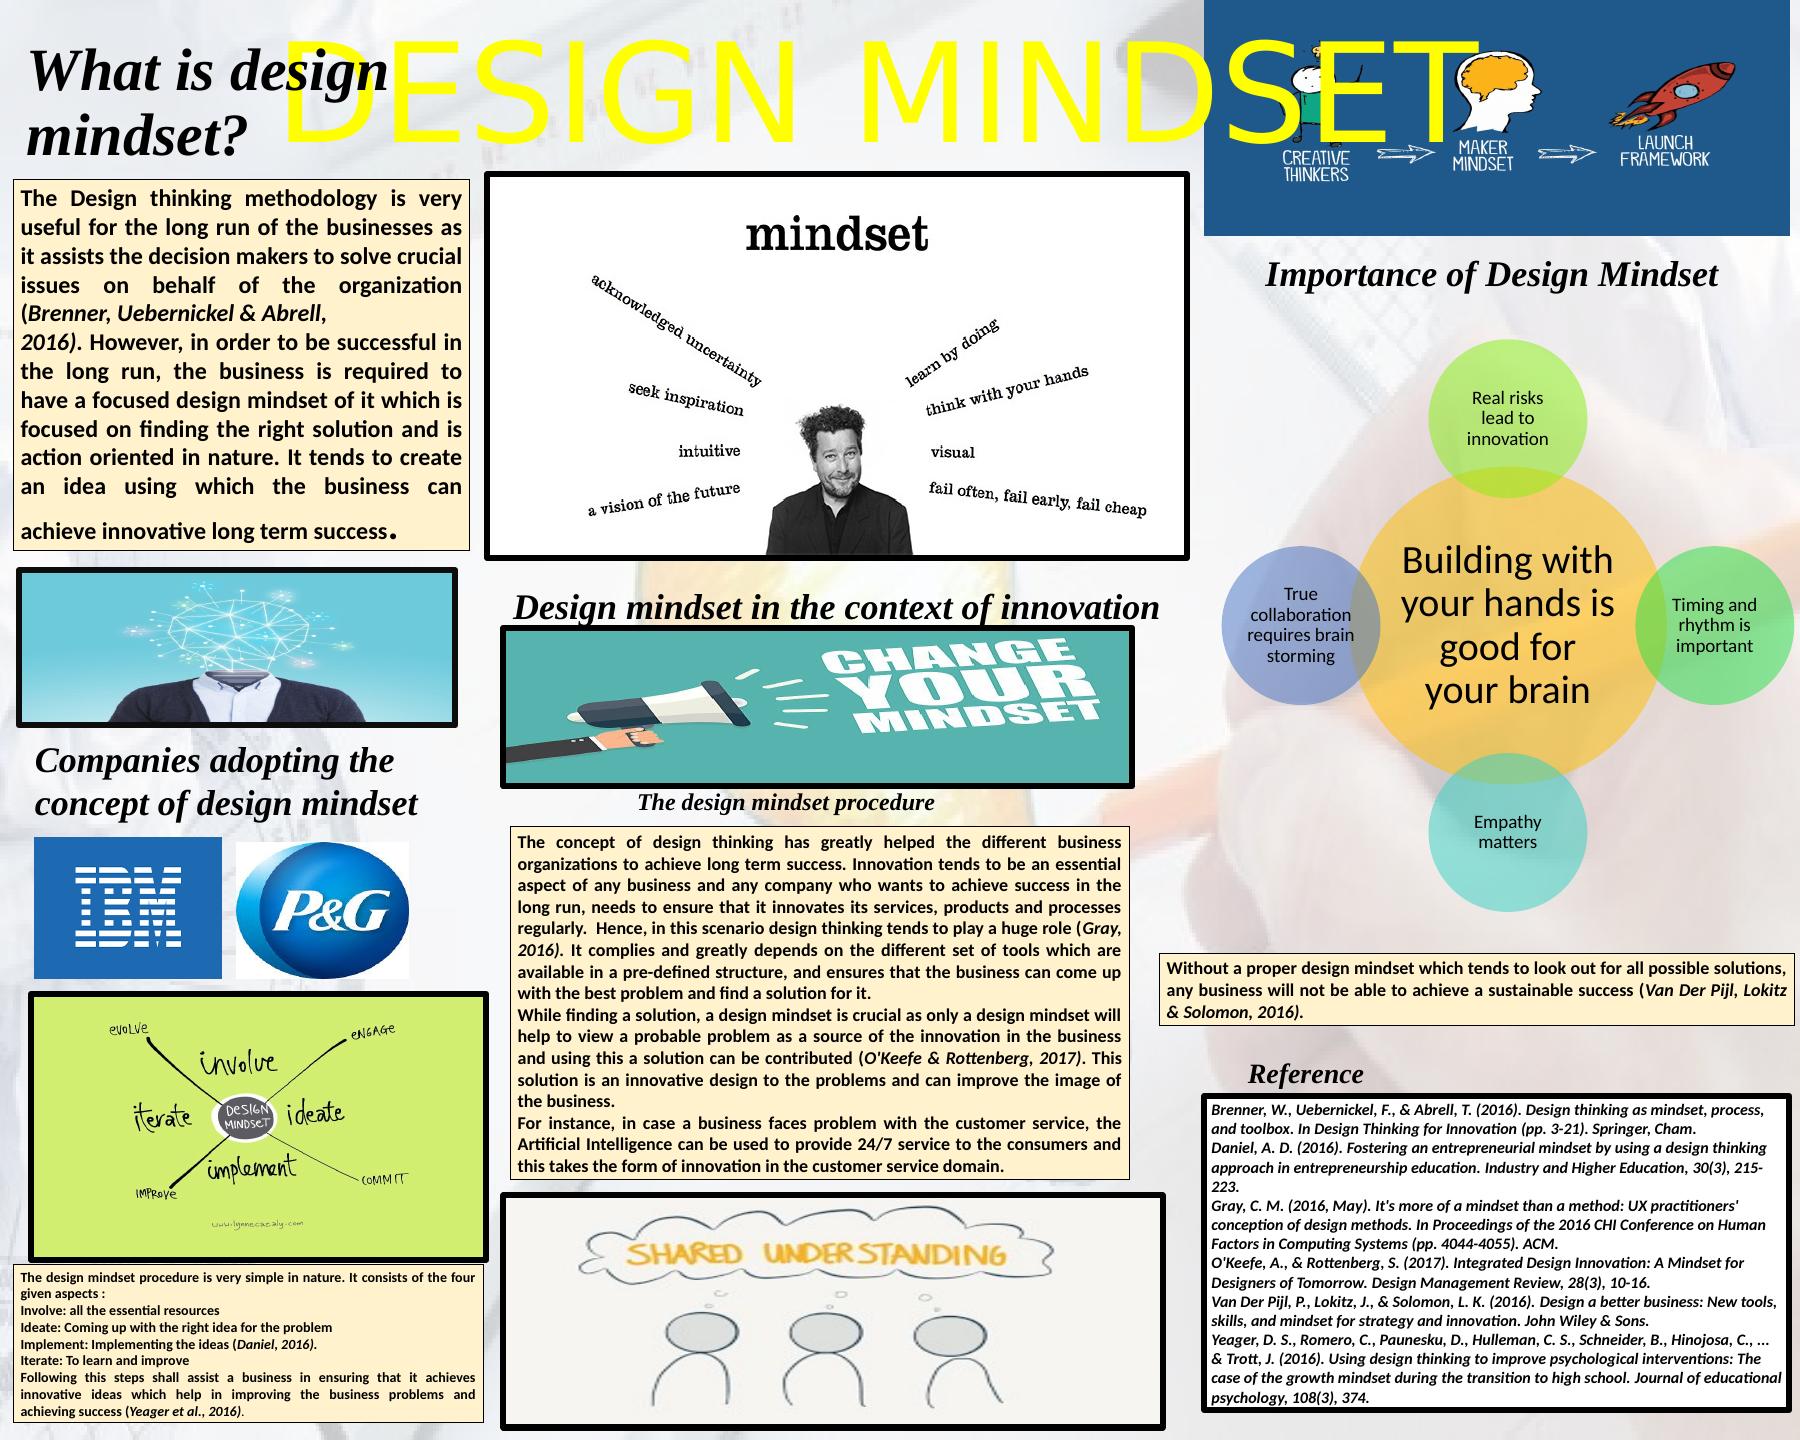 Design Mindset: Importance in Innovation and Business Success_1